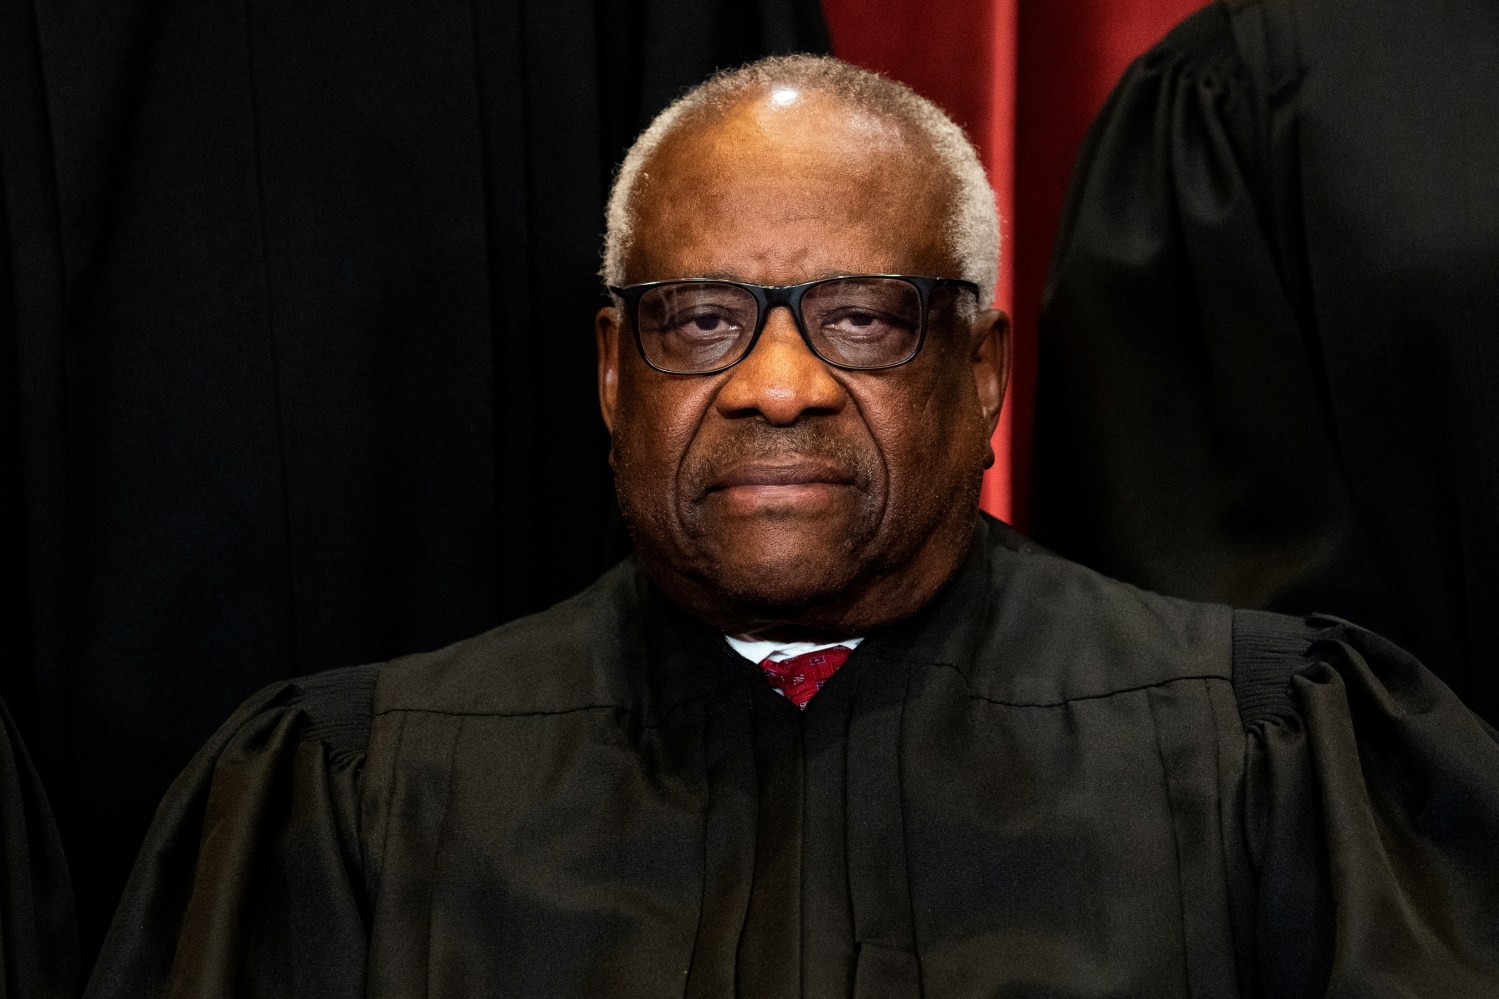 FILE PHOTO: Associate Justice Clarence Thomas poses during a group photo of the Justices at the Supreme Court in Washington, U.S., April 23, 2021. Erin Schaff/Pool via REUTERS/File Photo